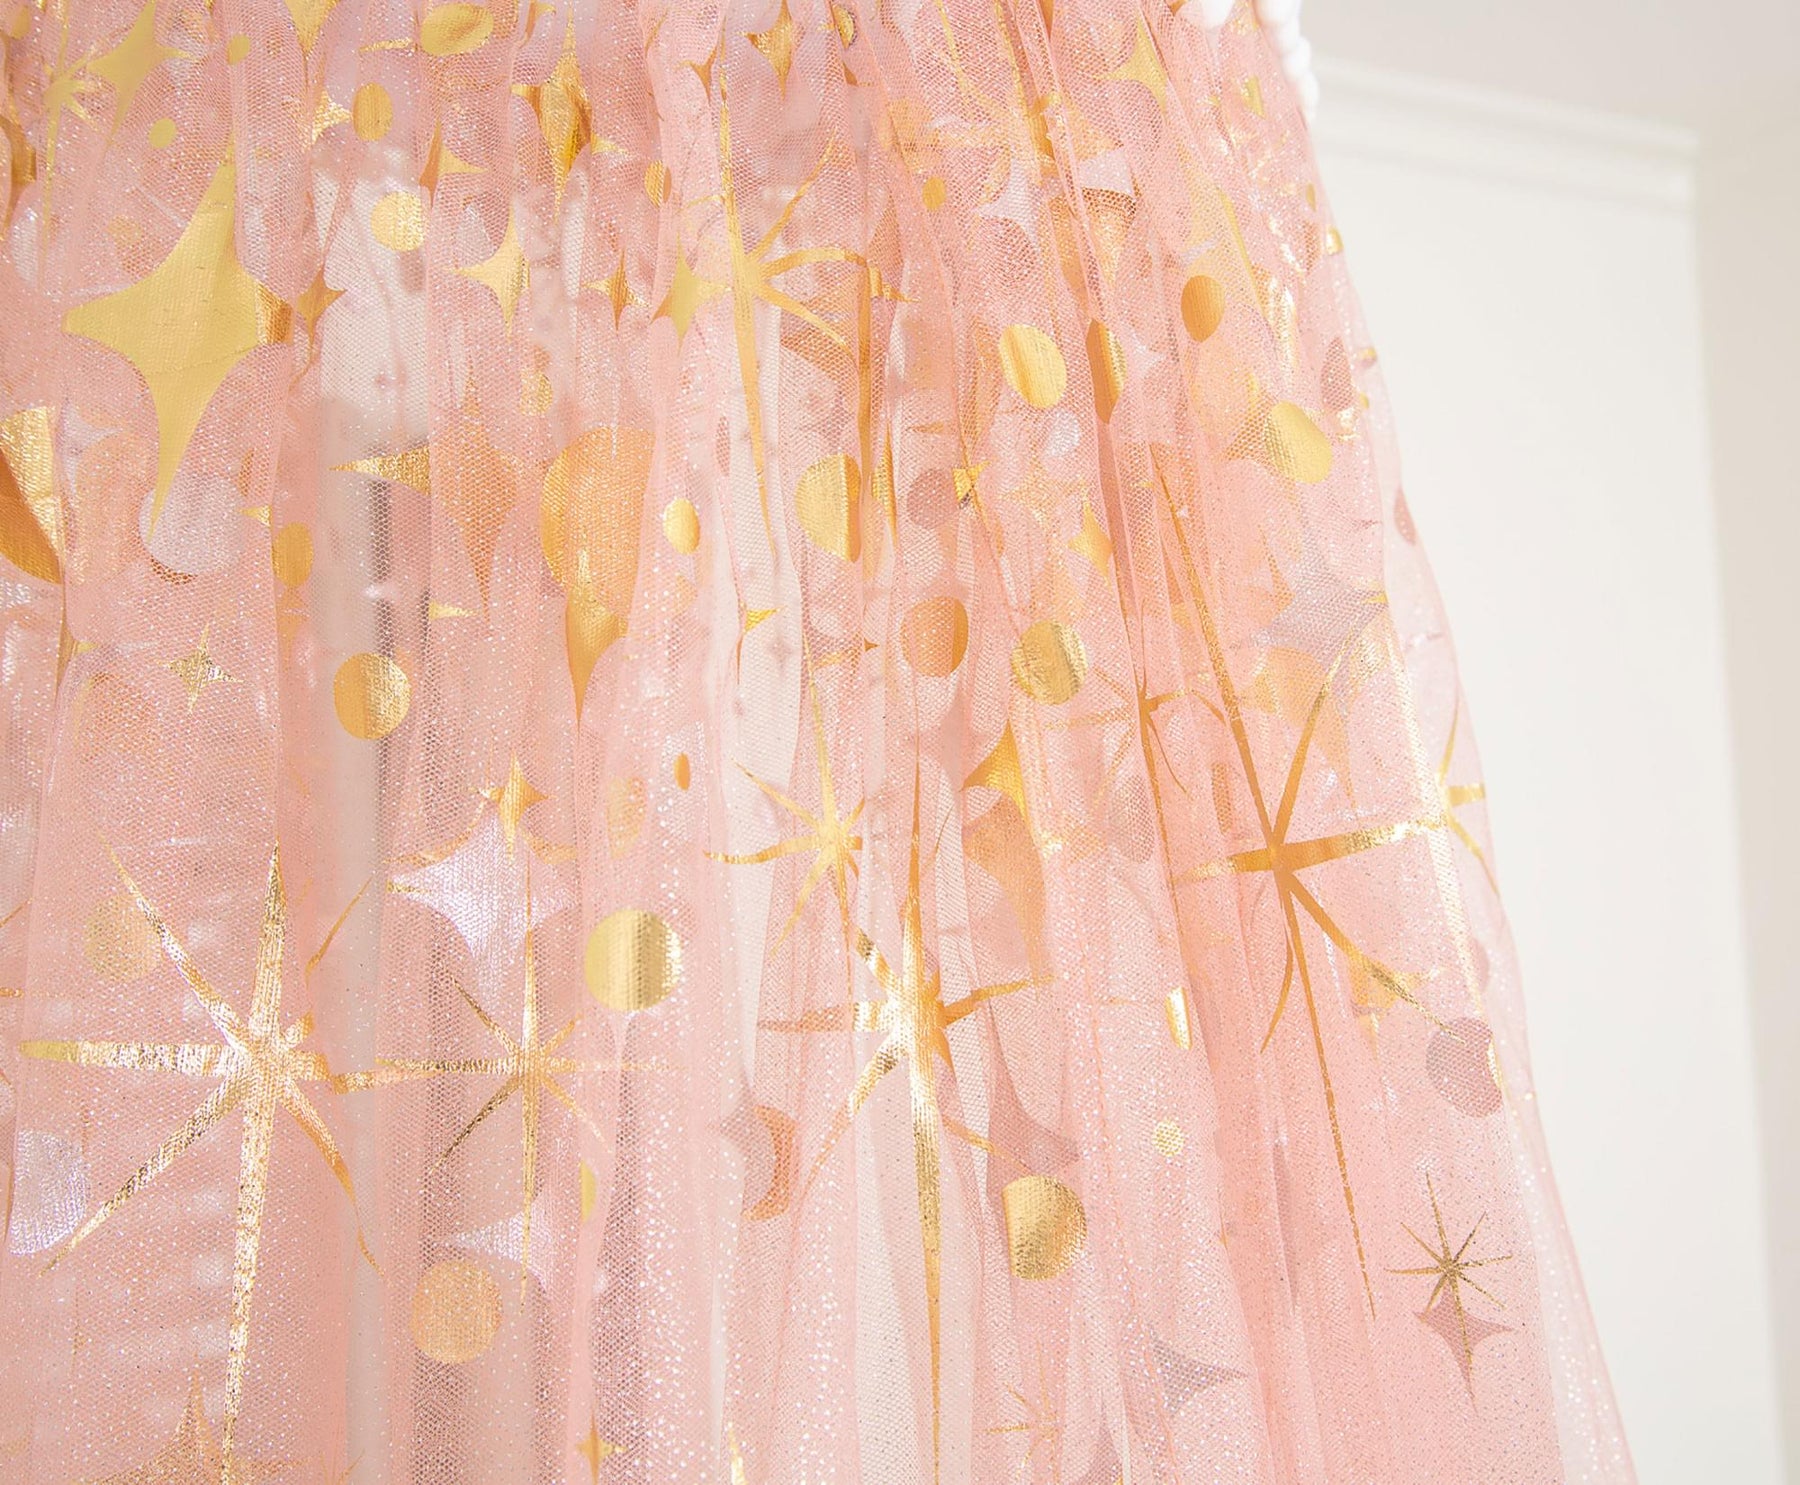 Disney Princess Kids Bed Canopy for Ceiling, Hanging Curtain Netting